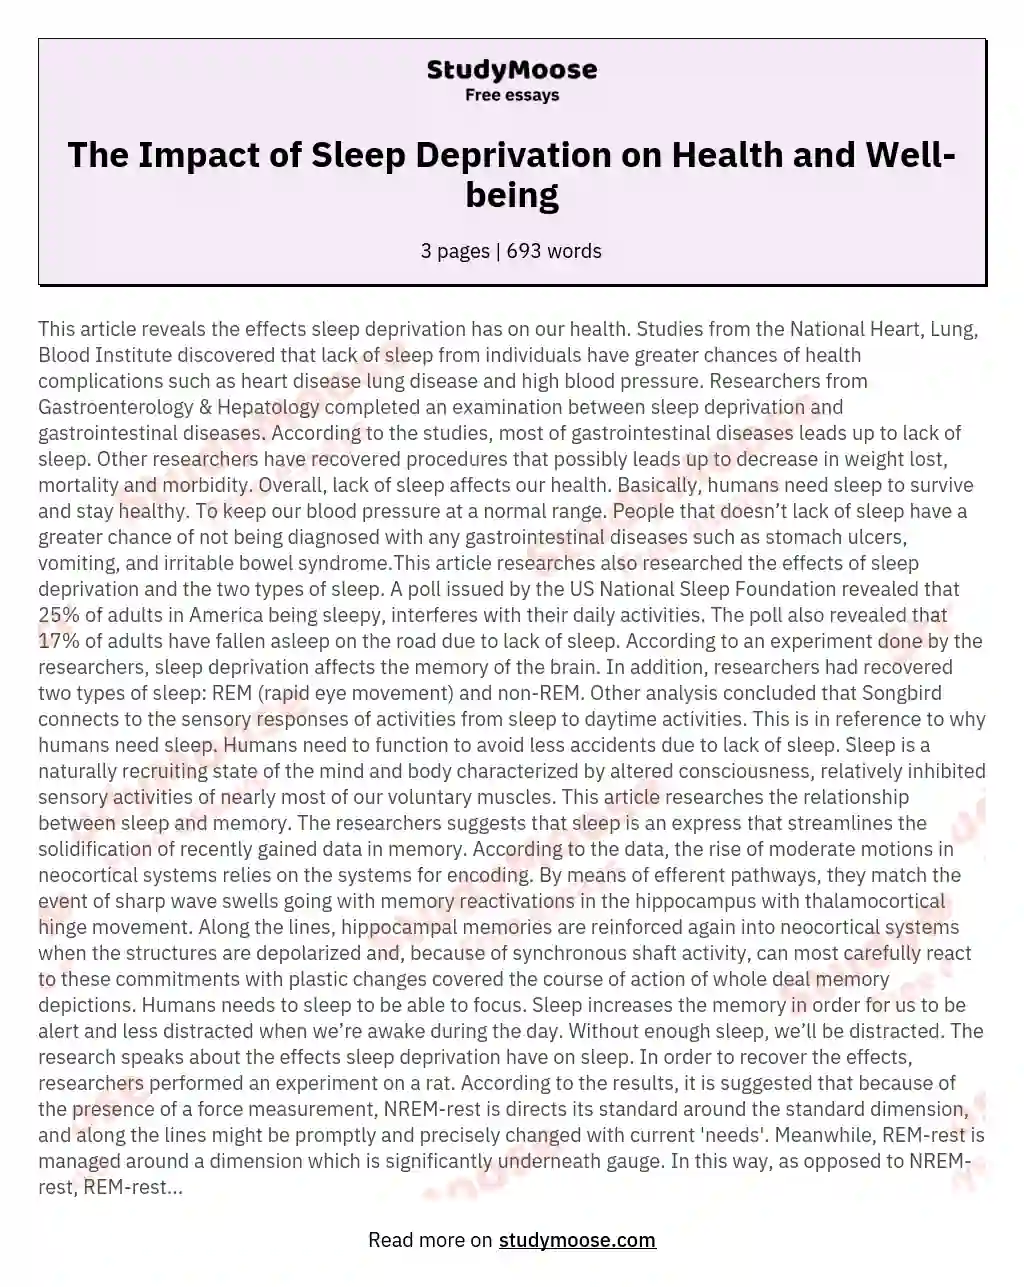 The Impact of Sleep Deprivation on Health and Well-being essay